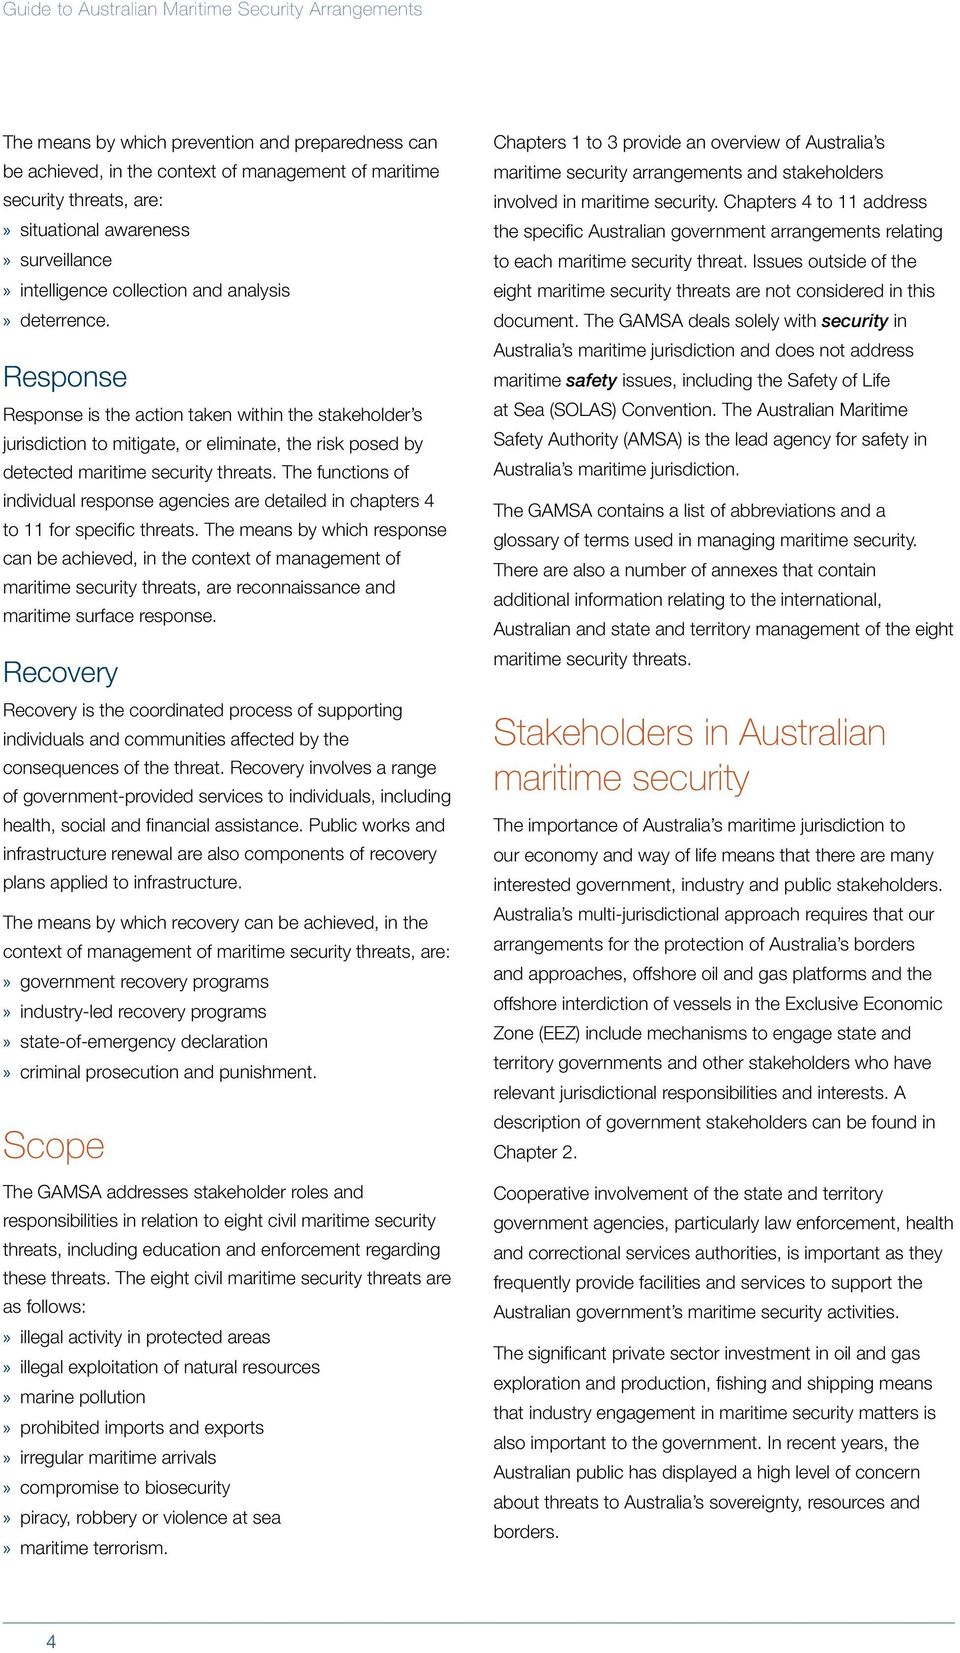 Response Response is the action taken within the stakeholder s jurisdiction to mitigate, or eliminate, the risk posed by detected maritime security threats.